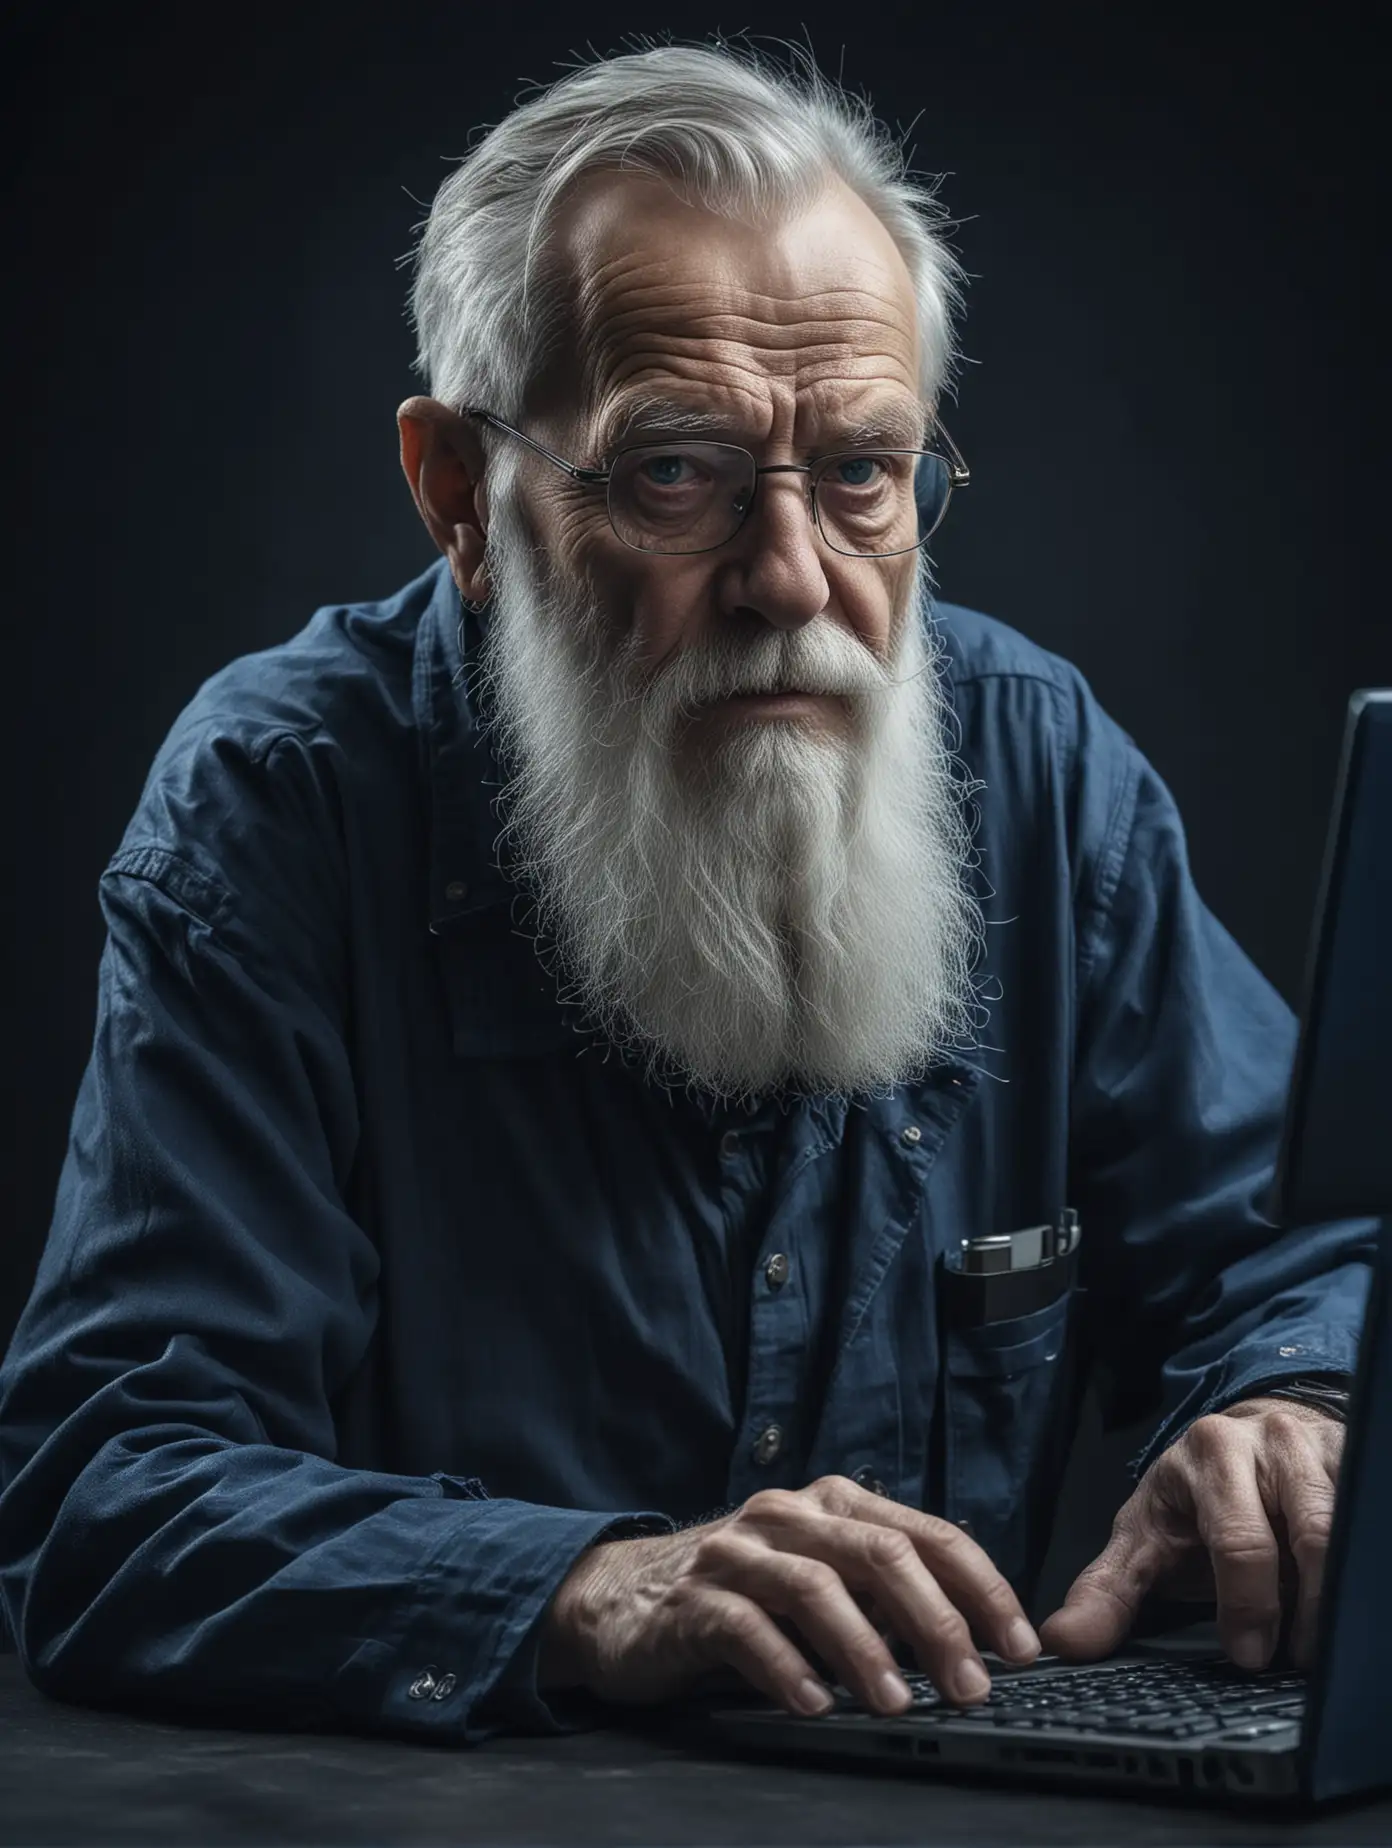 Professional Old Man Programming Computer Vision in Dark Blue Setting